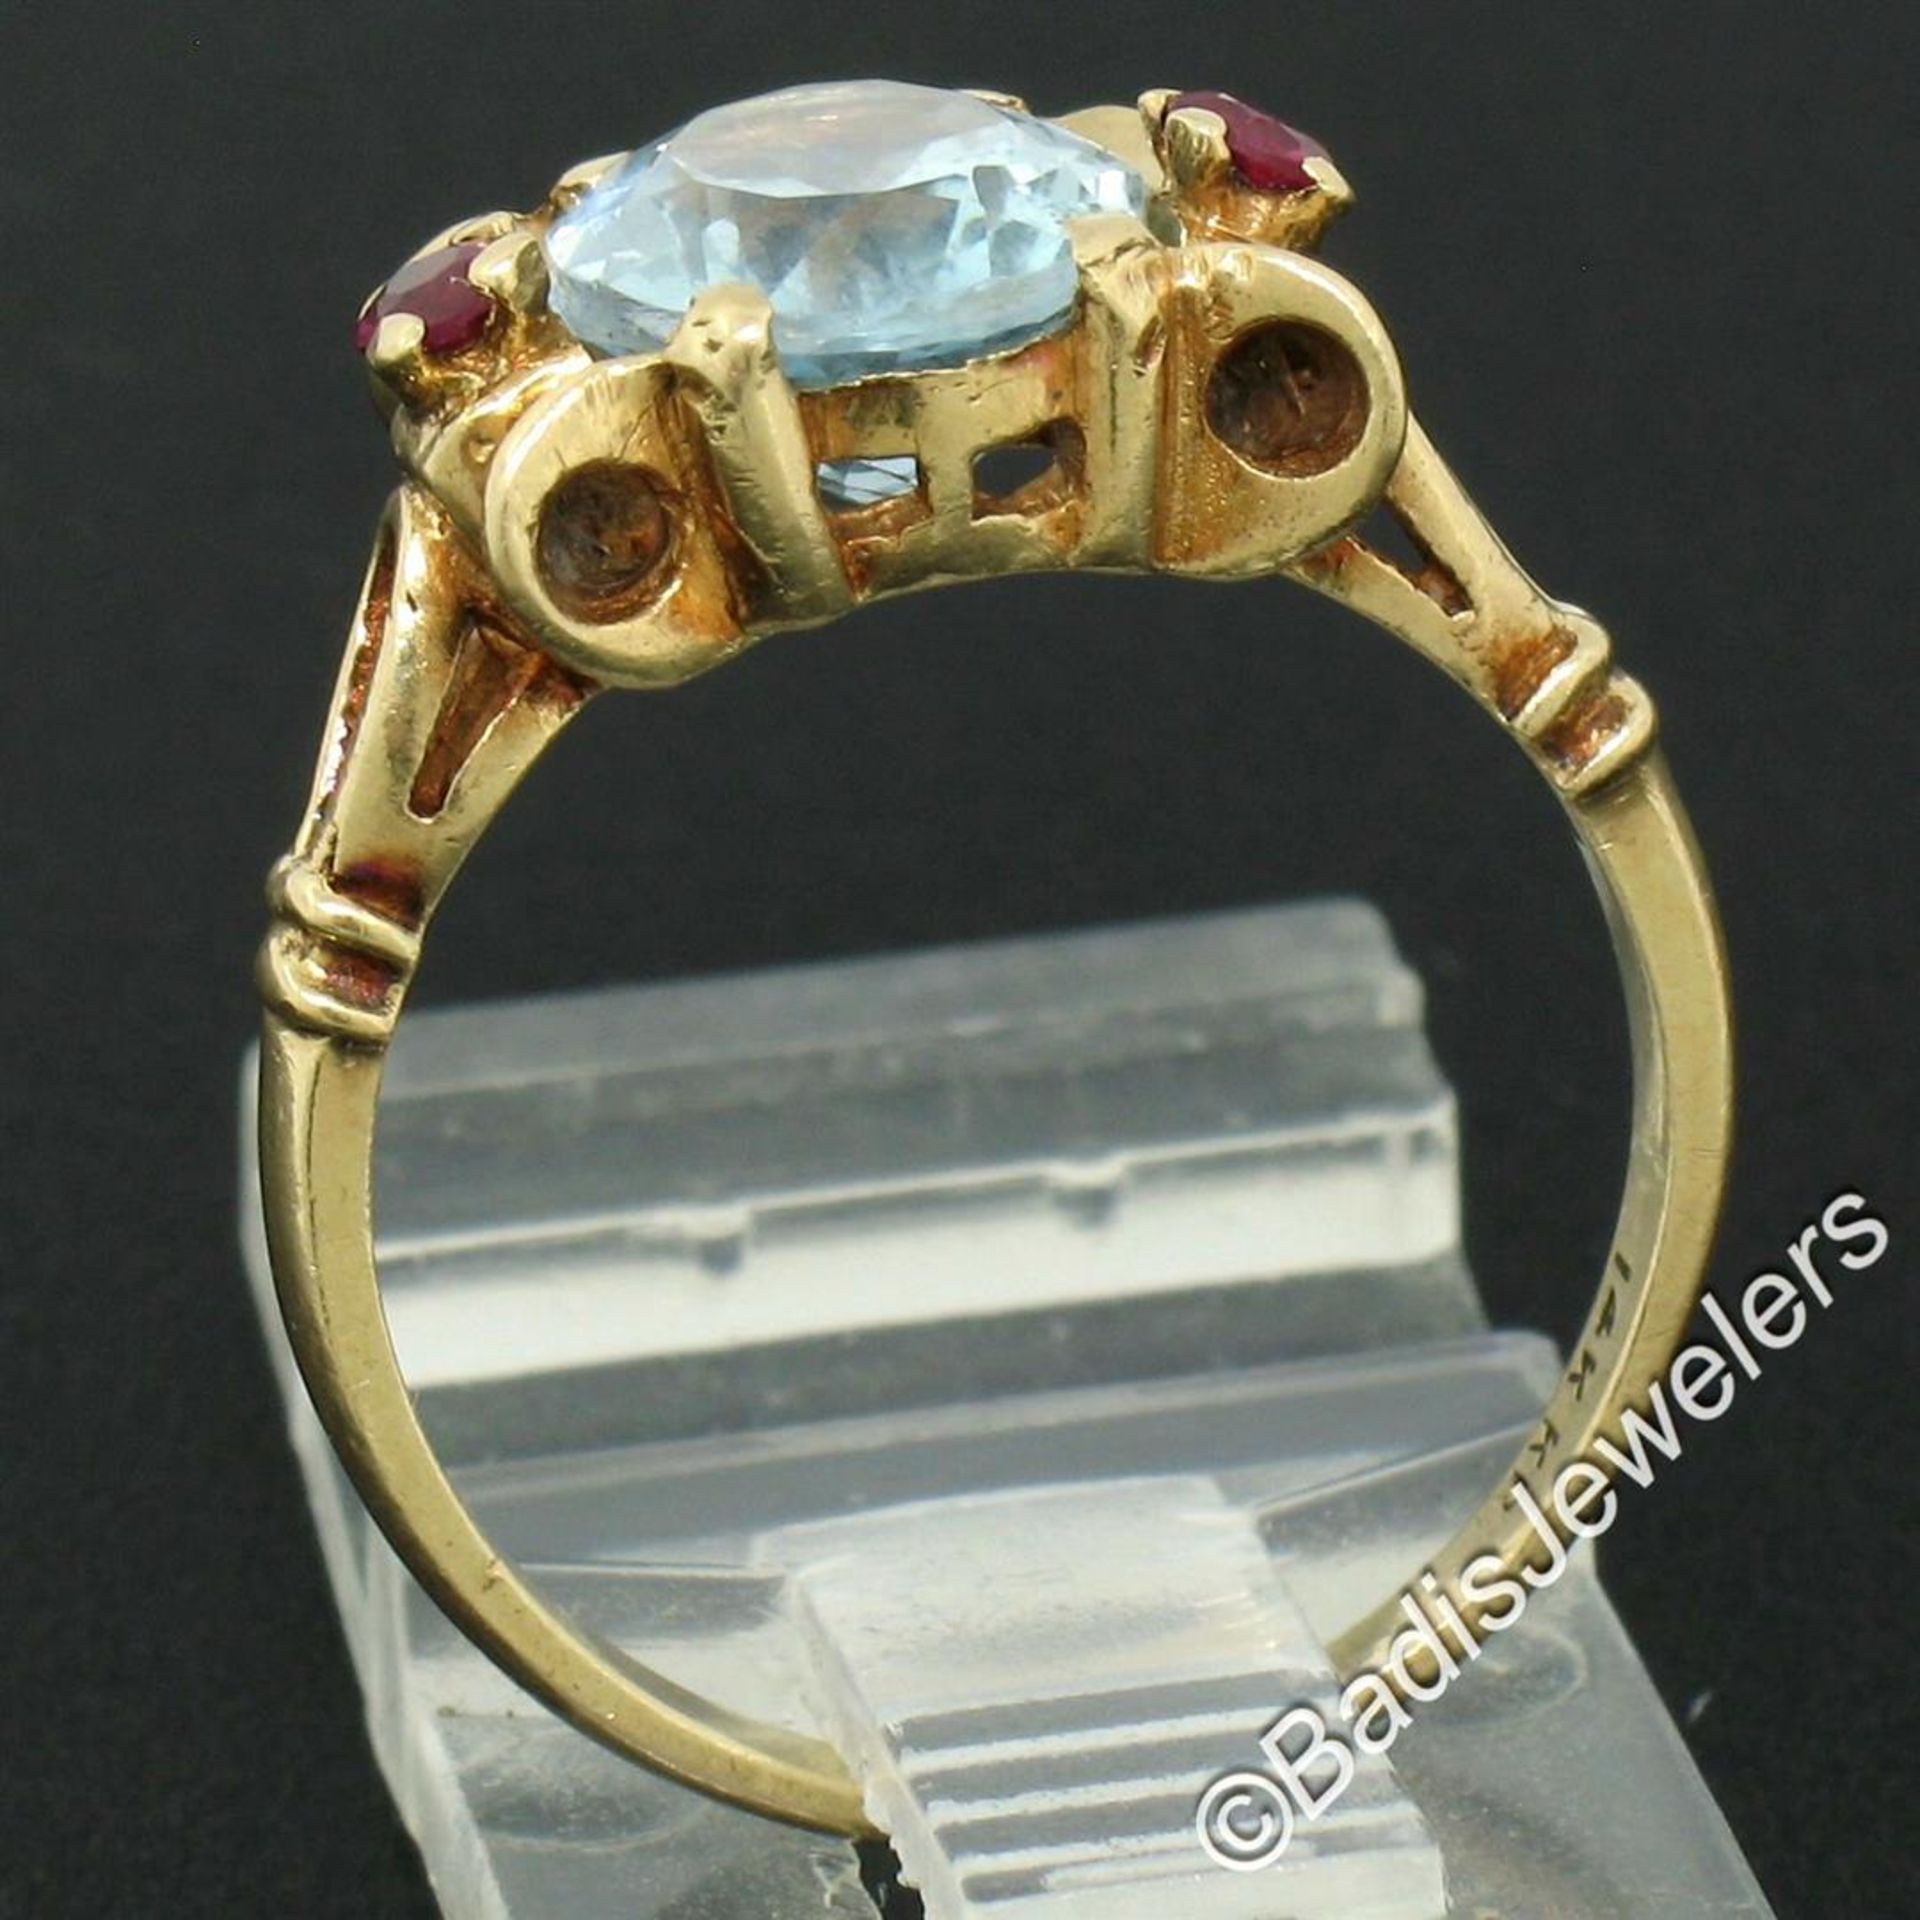 Retro 14kt Yellow Gold 2.18 ctw Aquamarine Solitaire and Synthetic Ruby Ring - Image 7 of 9